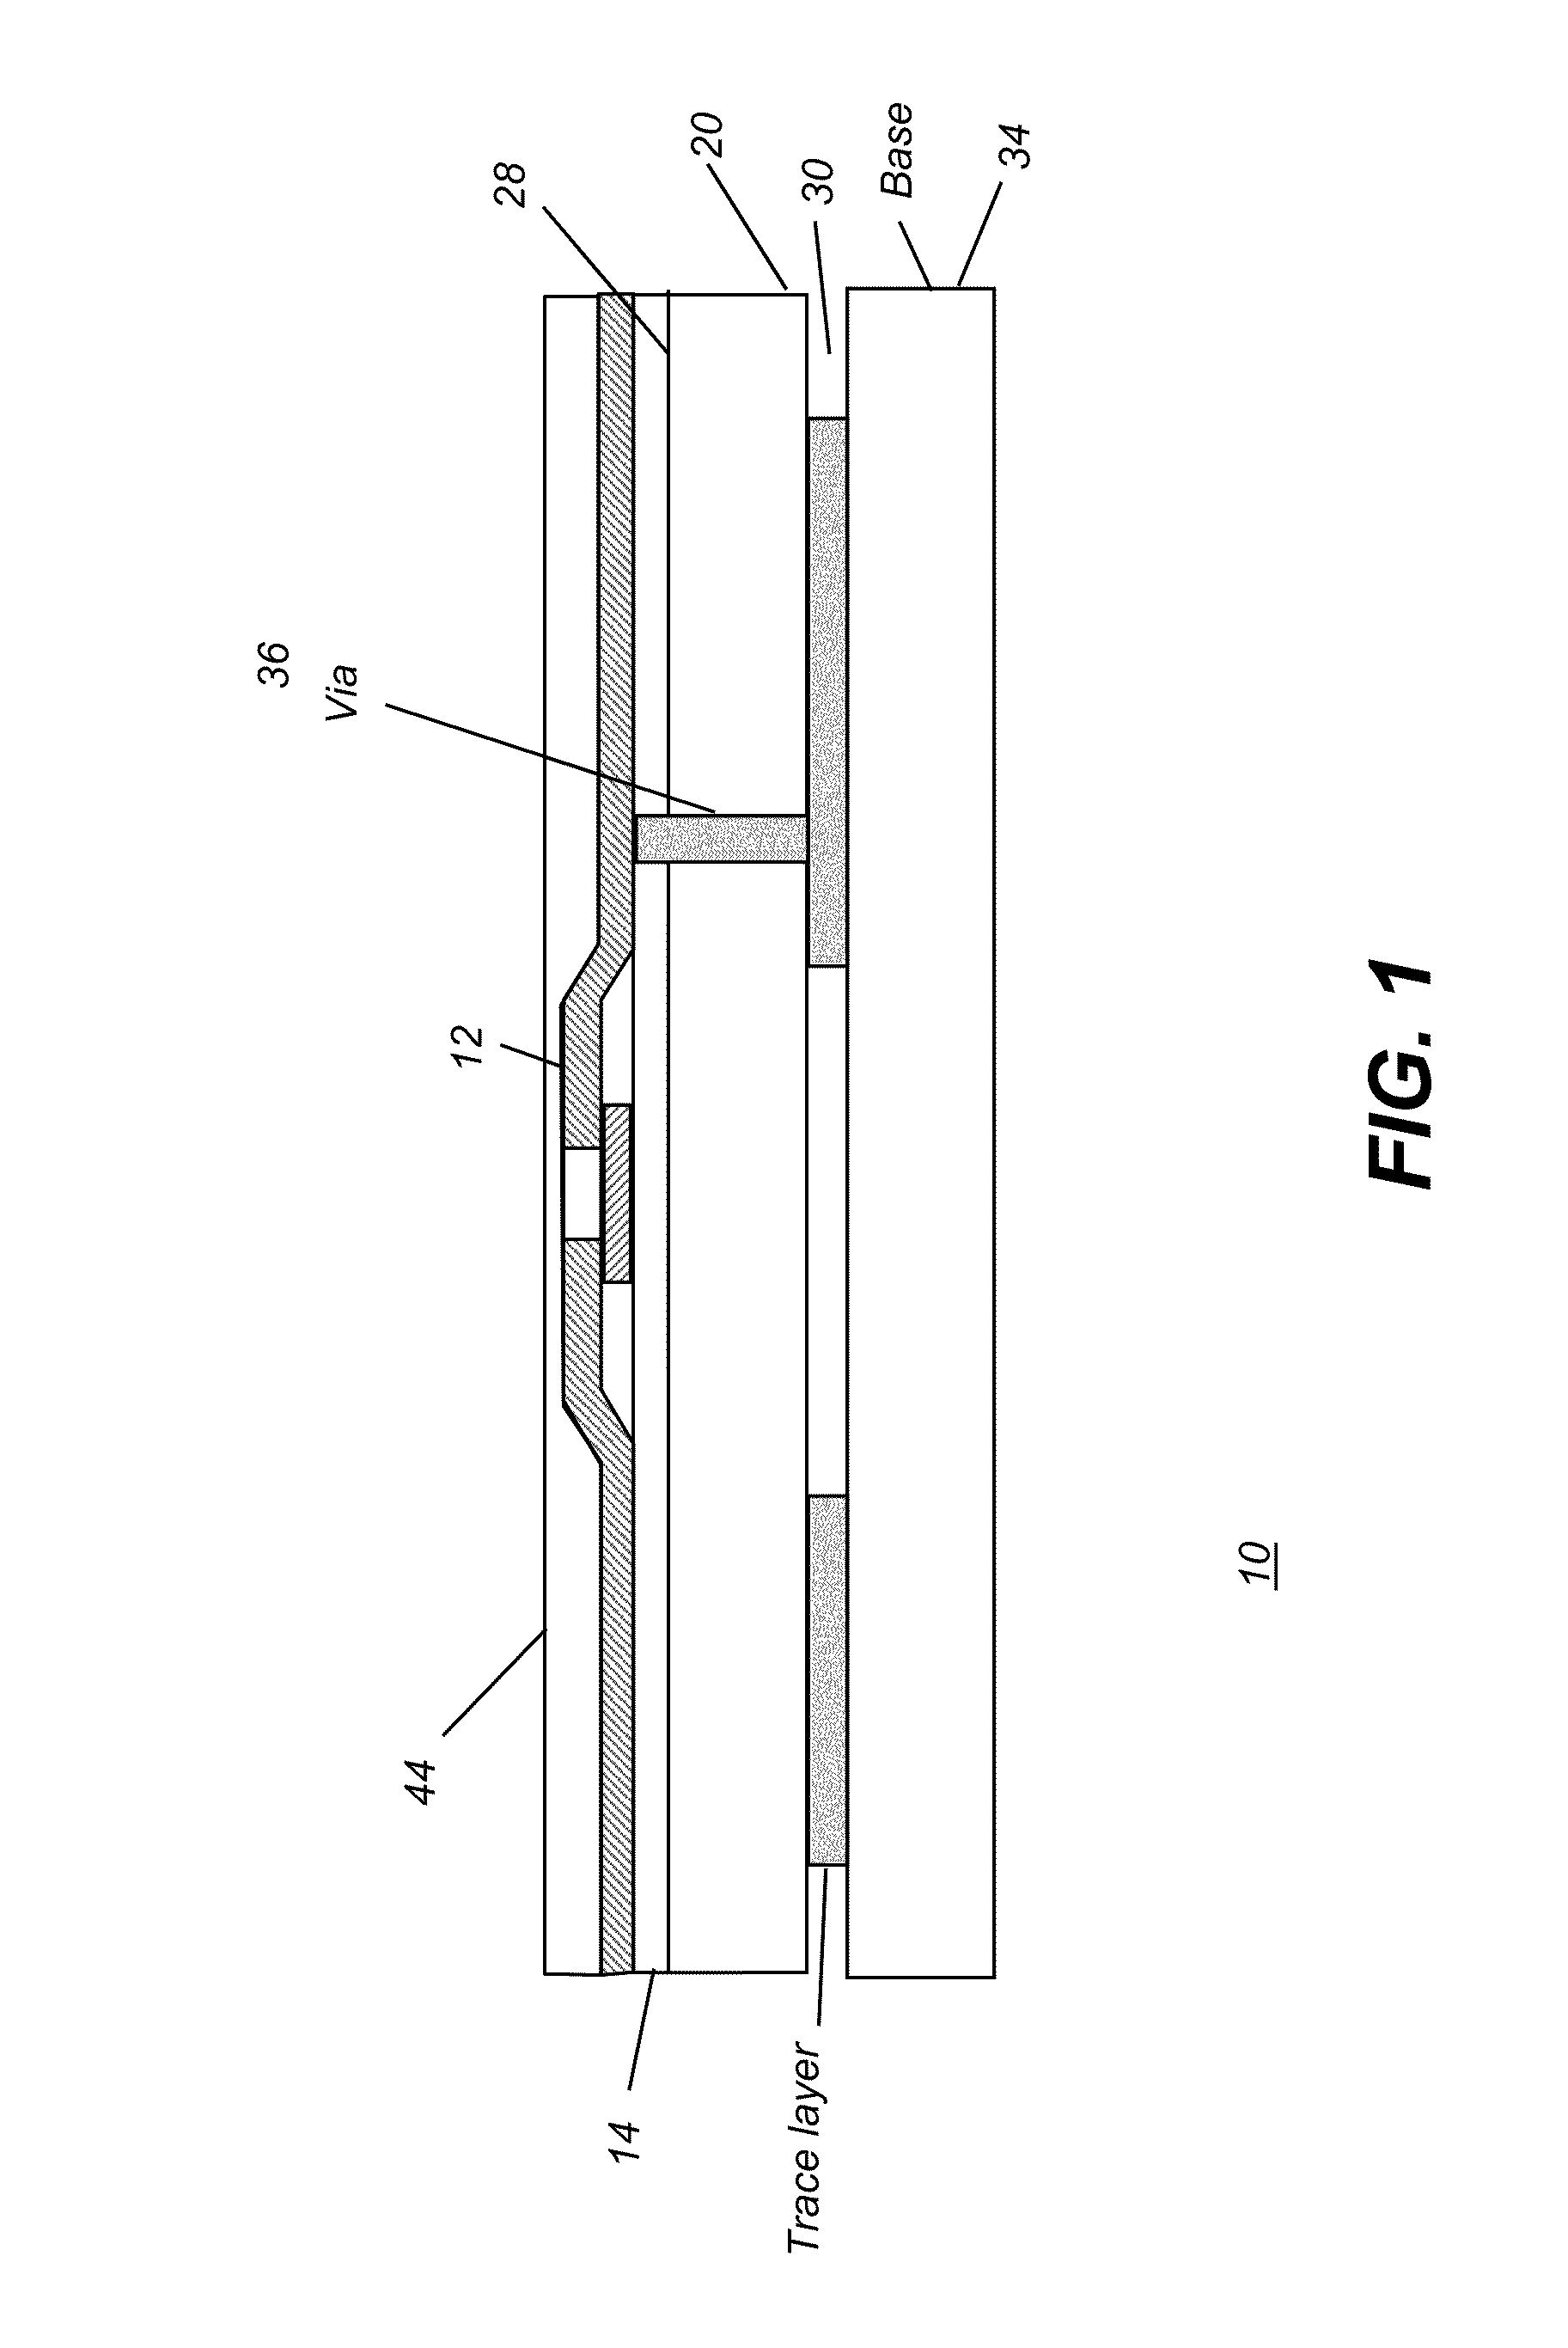 Flexible substrate with electronic devices and traces